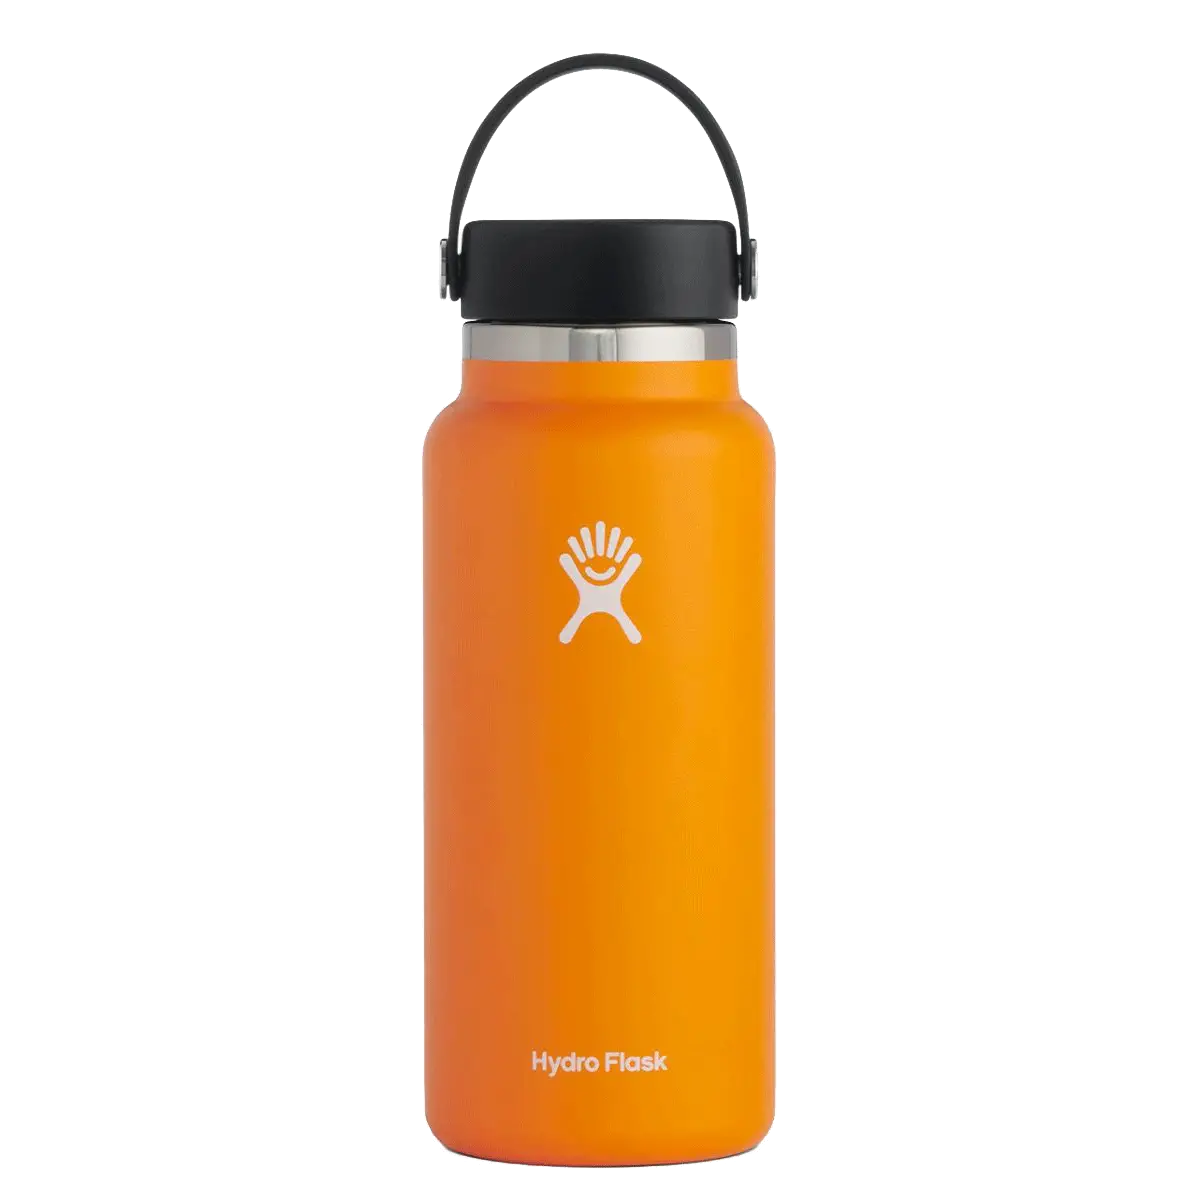 sustainable gift ideas, sustainable gifts, eco friendly, eco friendly gift ideas, eco friendly gifts, plastic free, zero waste, zero waste gift, hydroflask, stainless steel, plastic water bottles, low waste, ethically made,